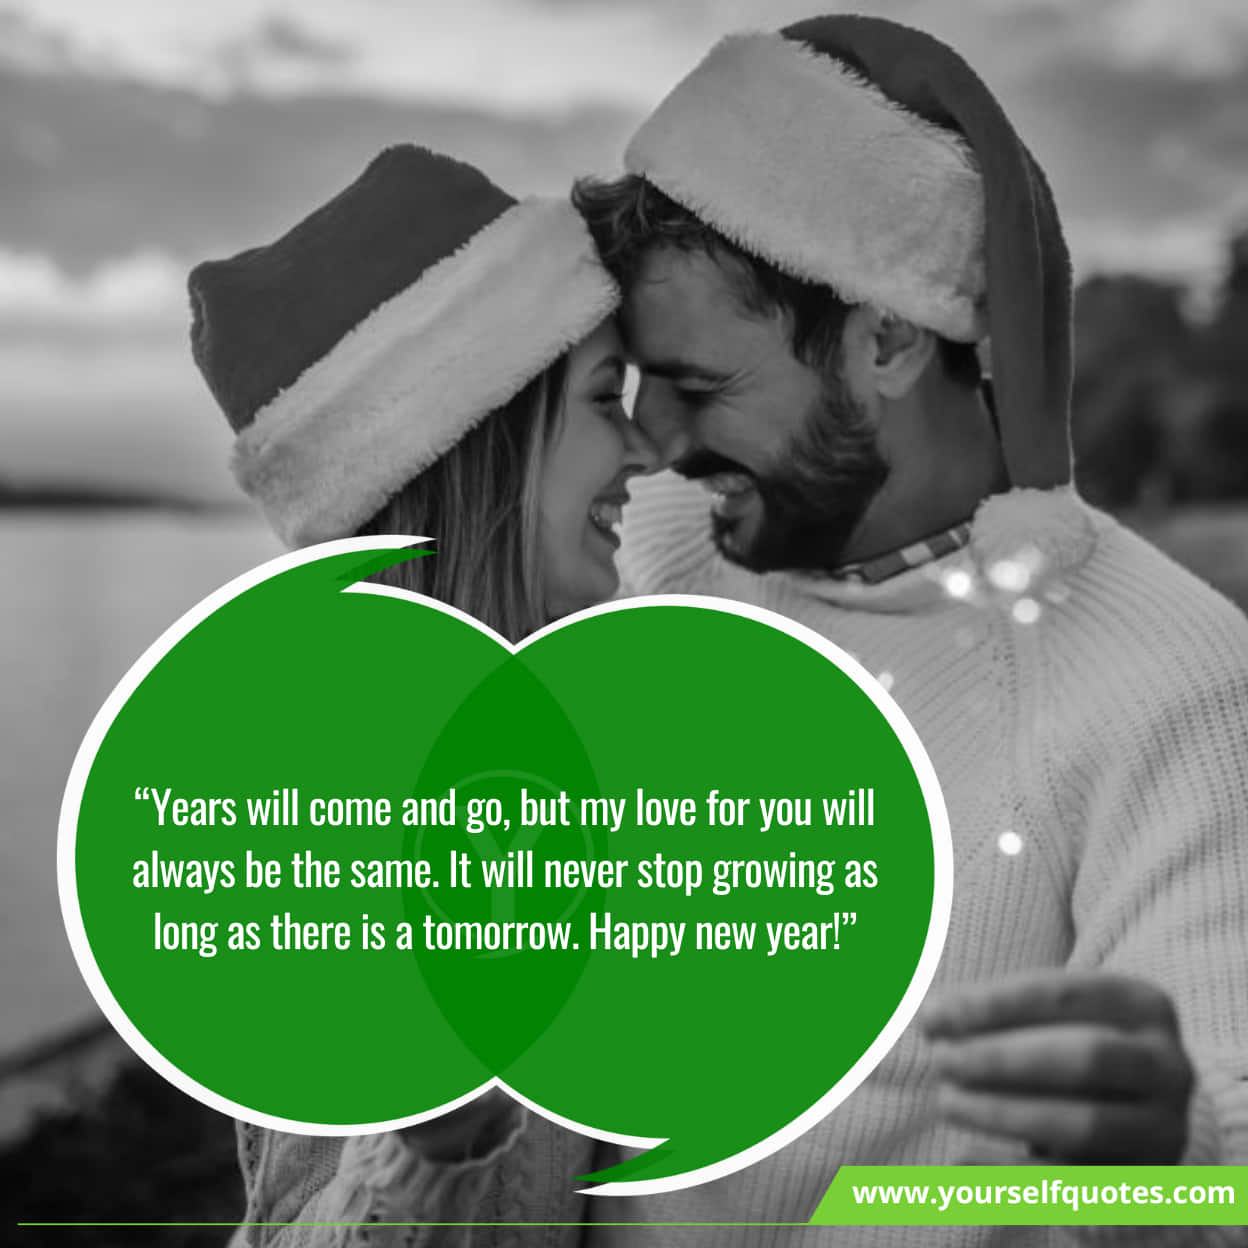 Inspiring Happy New Year Wishes For Couples